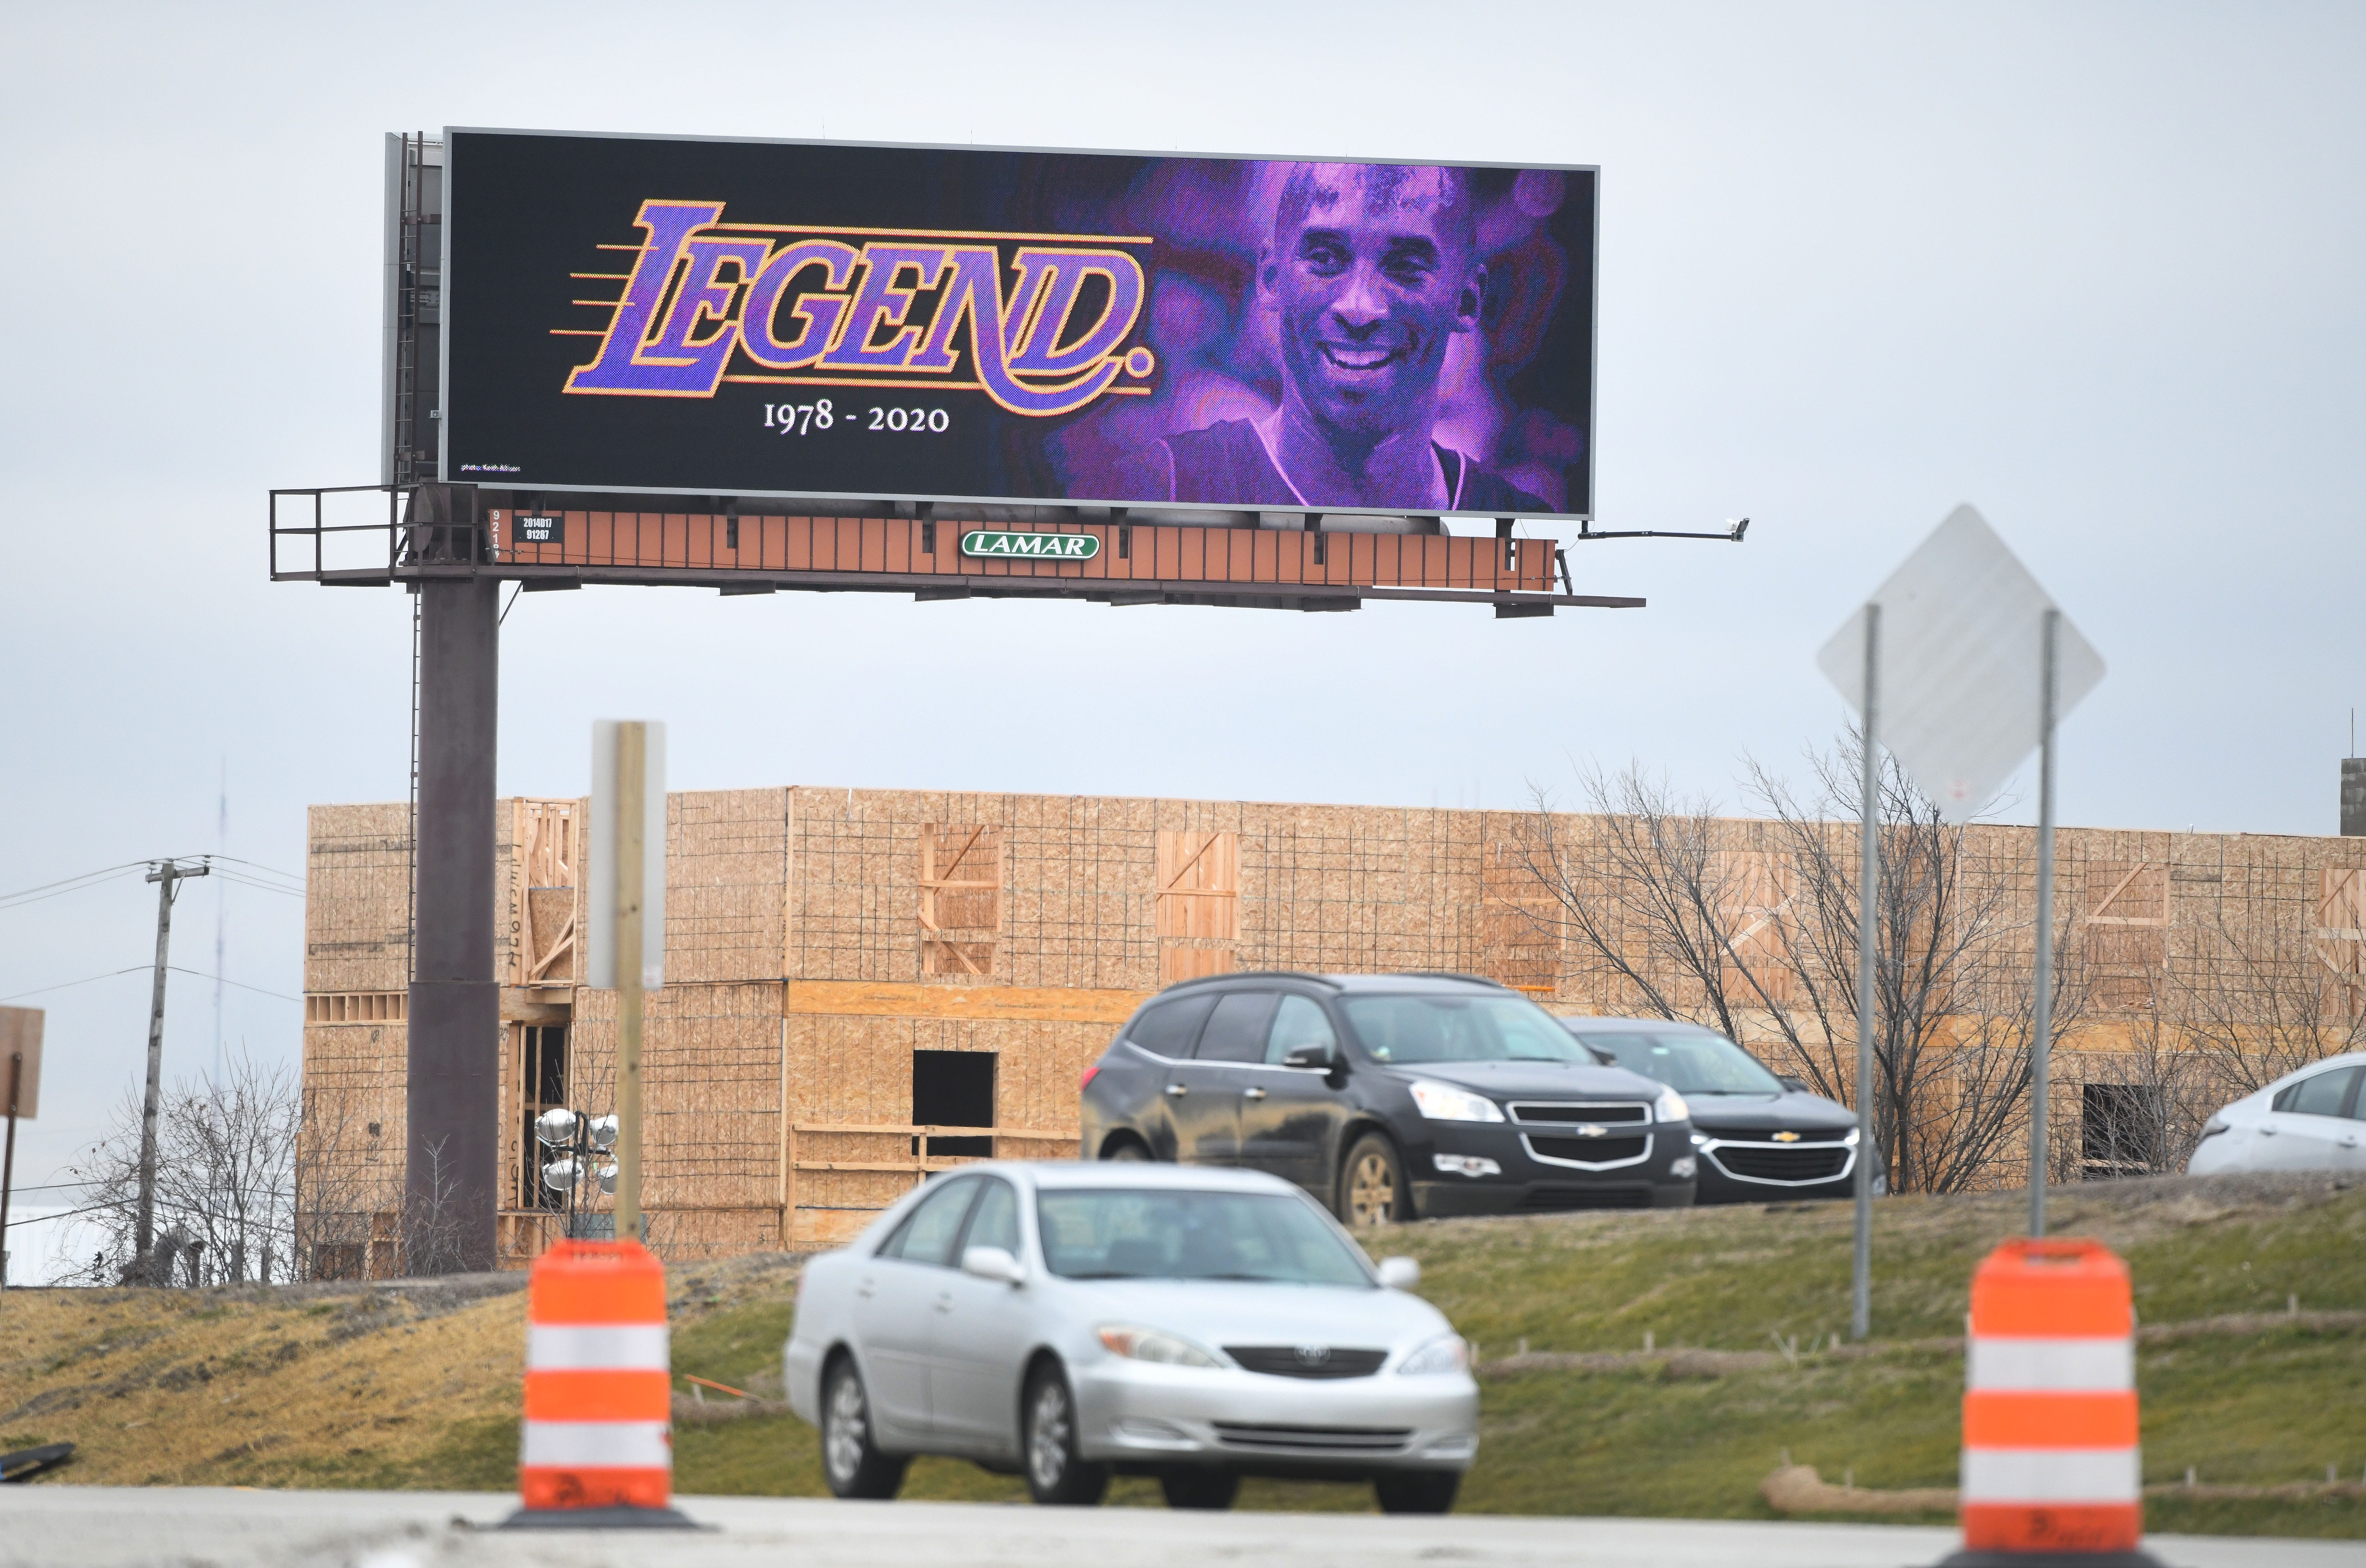 A billboard in memory of deceased Kobe Bryant, whose death at age 41 in a helicopter crash has stunned the sports world, on southbound I-75 in Troy, Michigan on January 27, 2020,